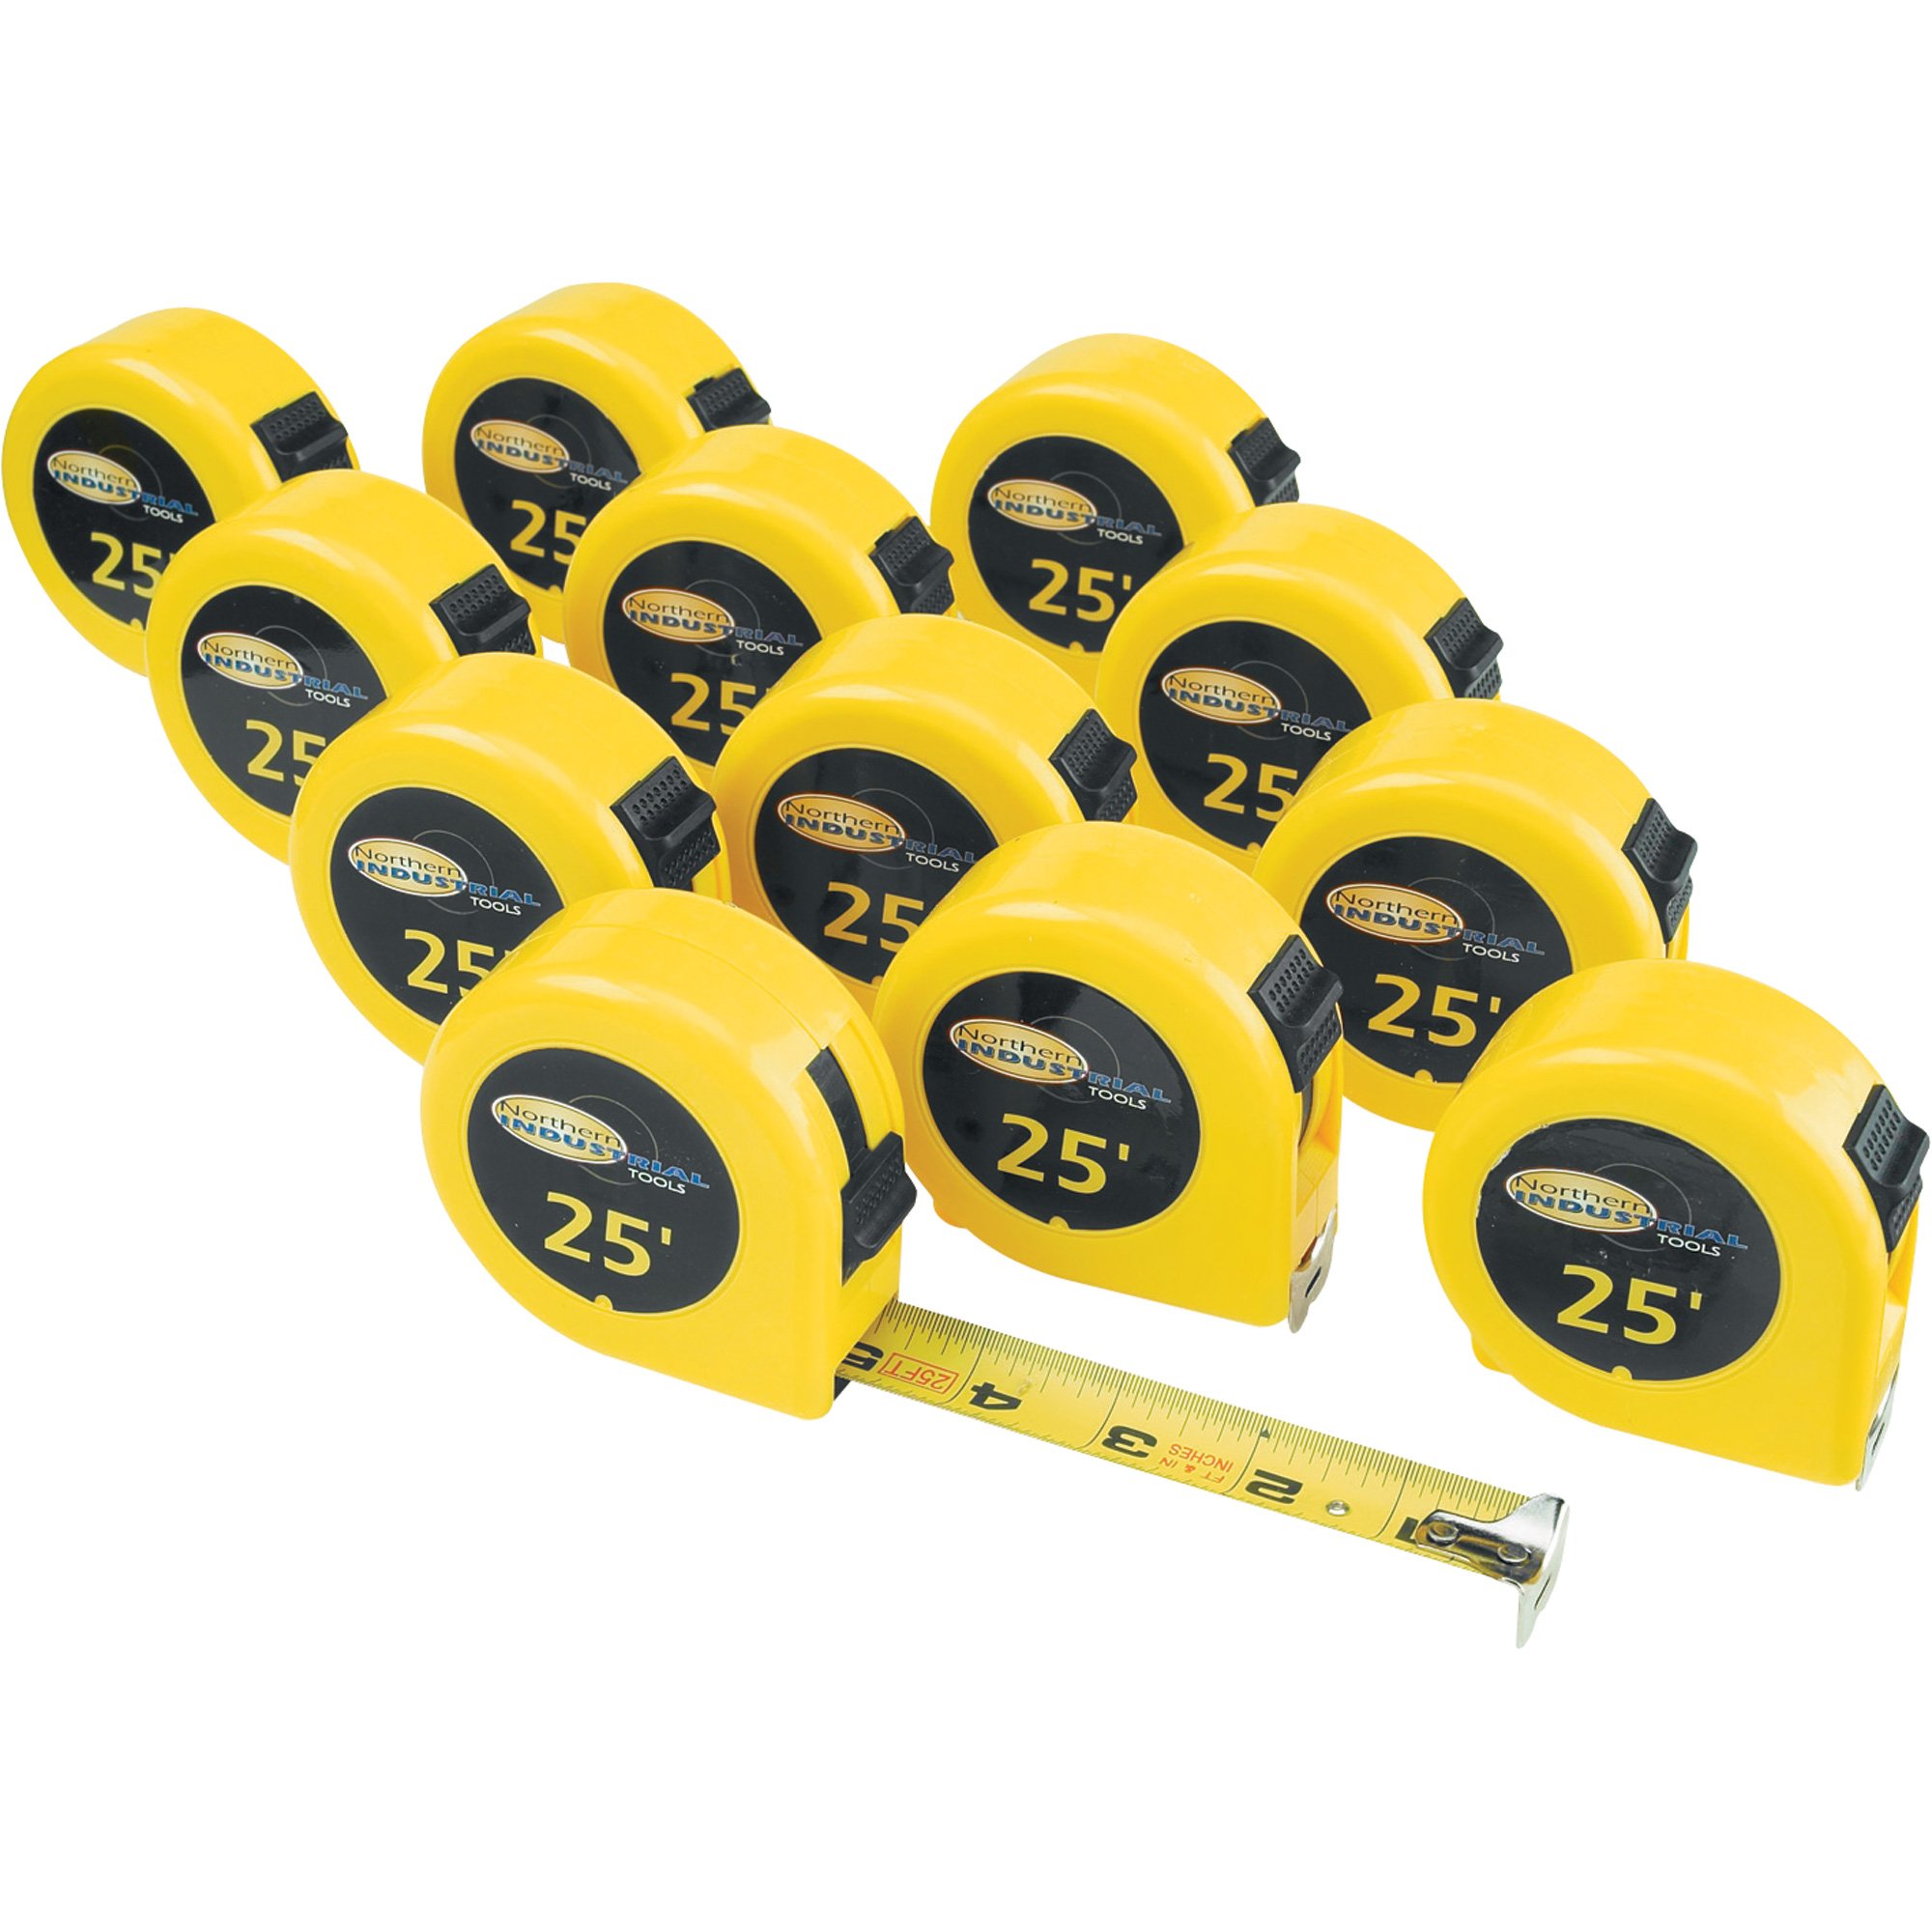 Northern Industrial Tape Measures — 1in. x 25ft. 12-Pk.